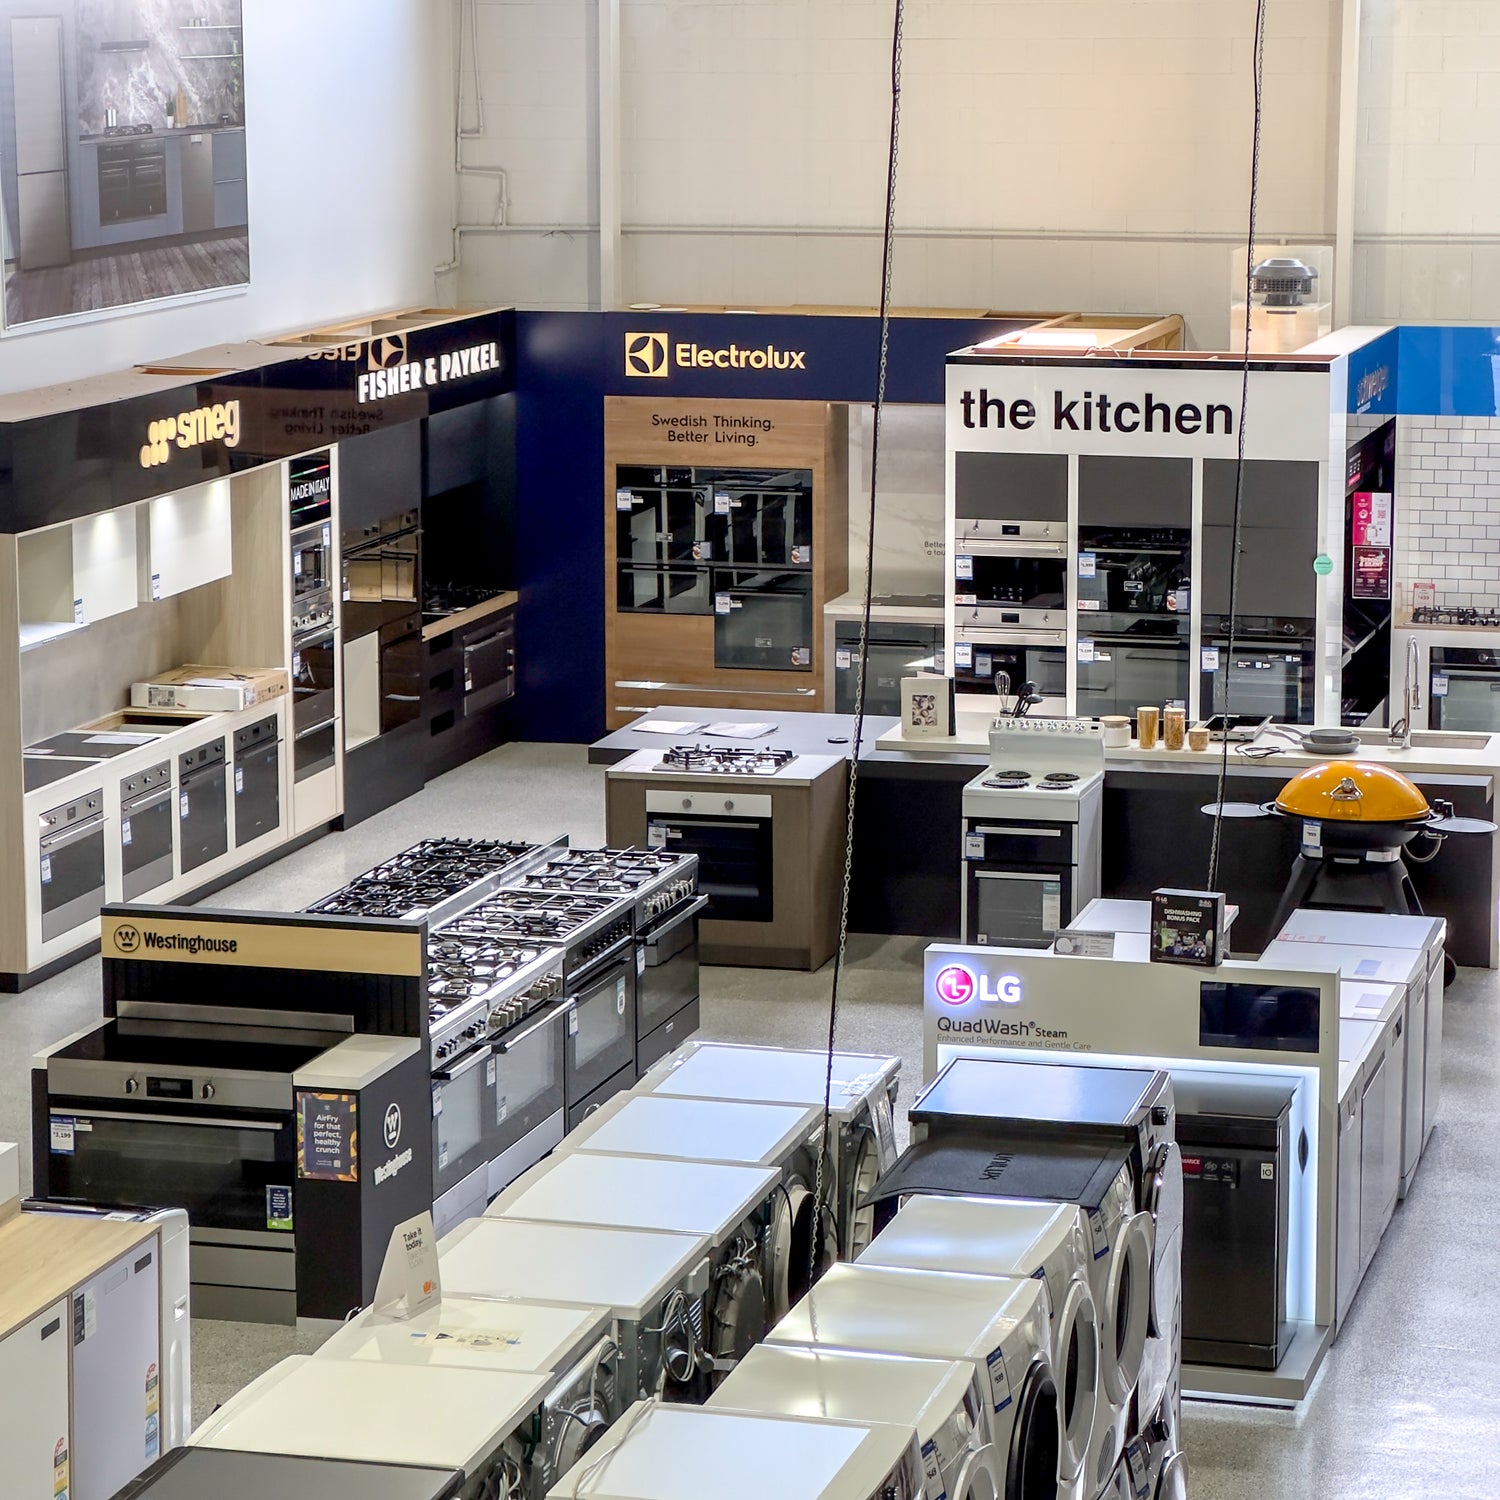 The Save on Appliances showroom with kitchen appliances including ovens, washing machines, and refrigerators from brands like Electrolux, LG, Smeg and Westinghouse